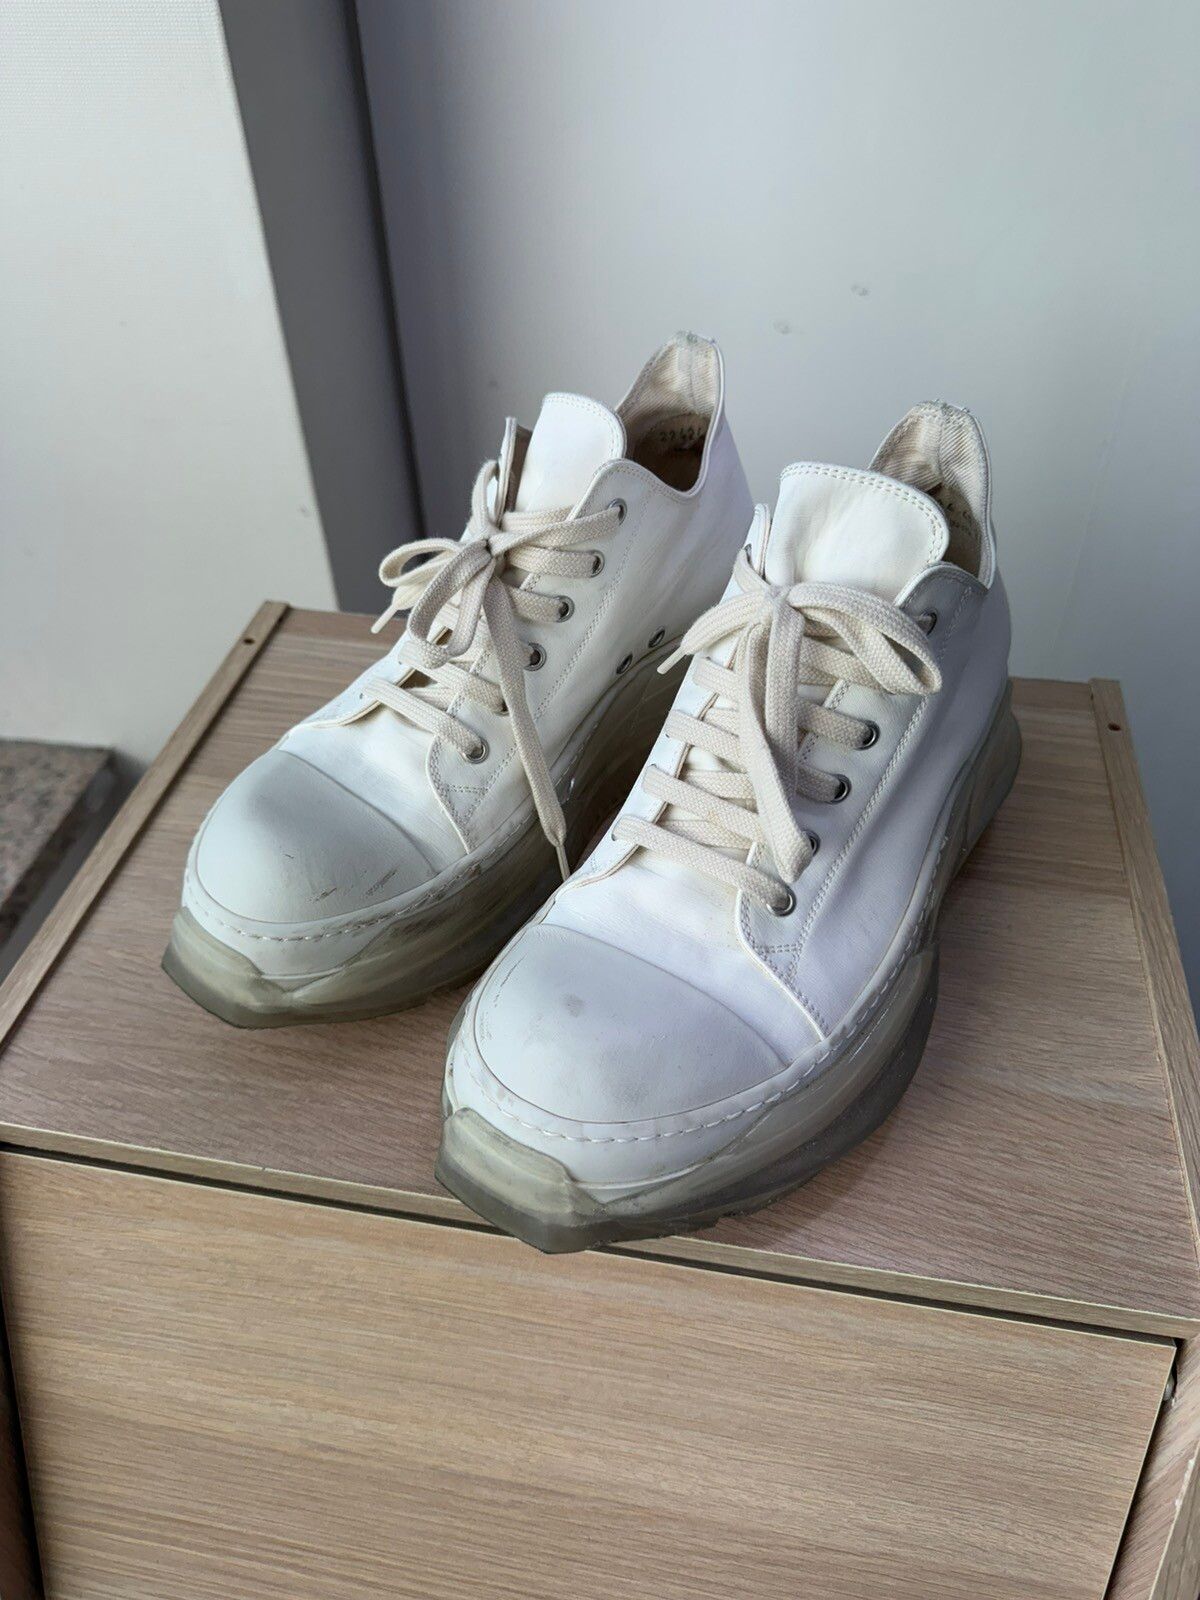 Rick Owens 40 / Rick owens abstract ramones low | Grailed